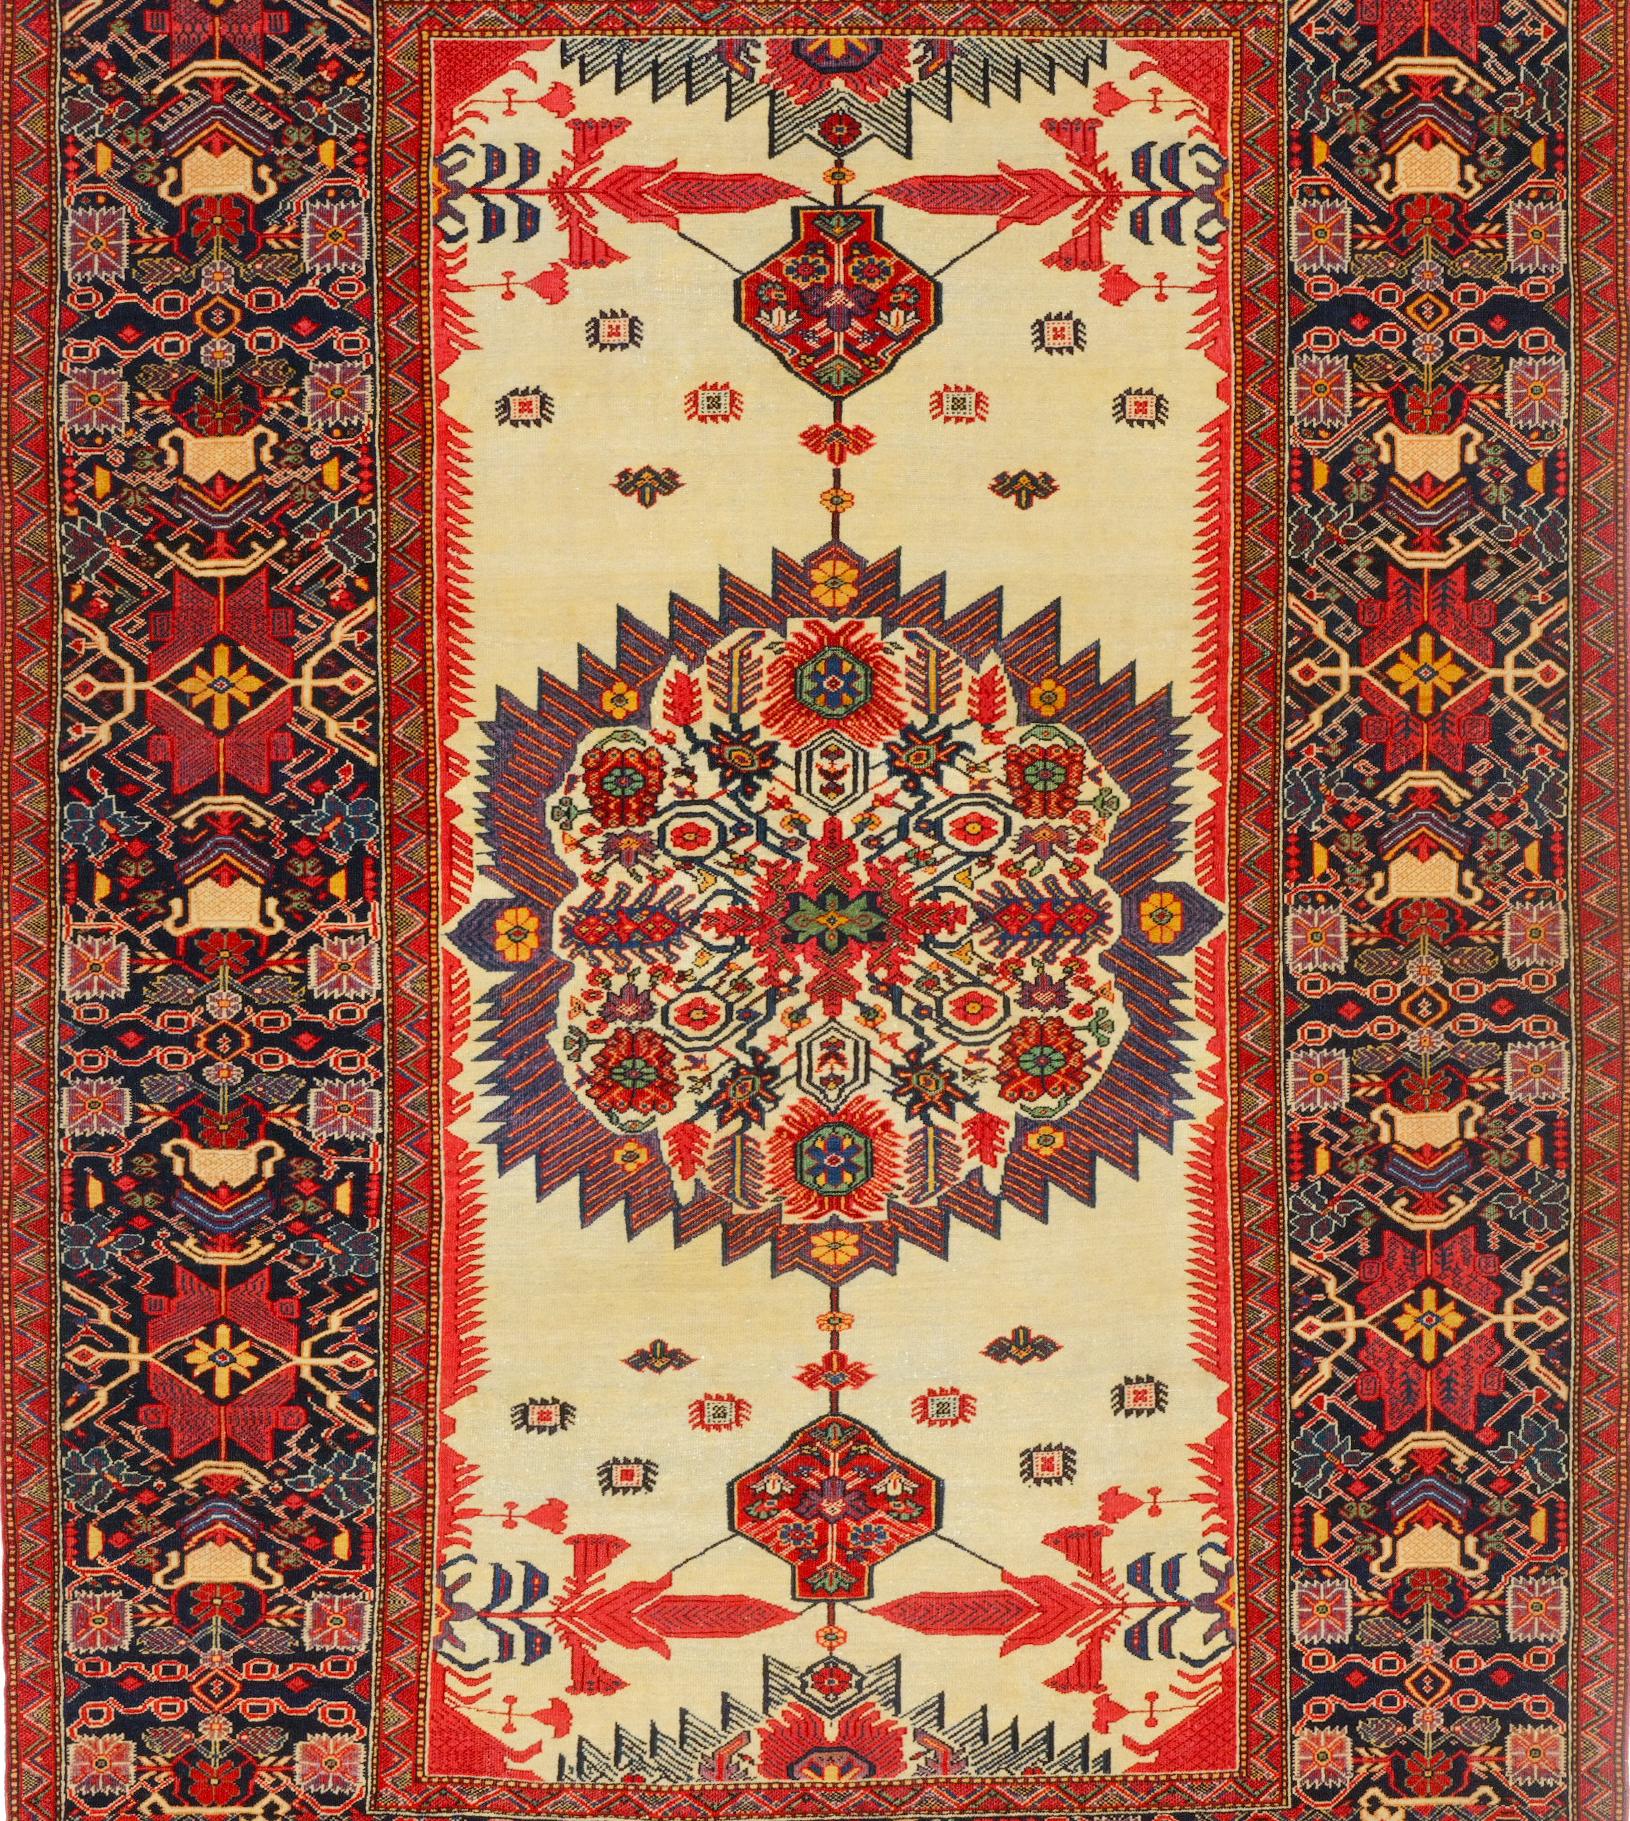 Hand-Knotted Antique Farahan Sarouk Carpet - Late of 19th Century Sarouk Rug For Sale